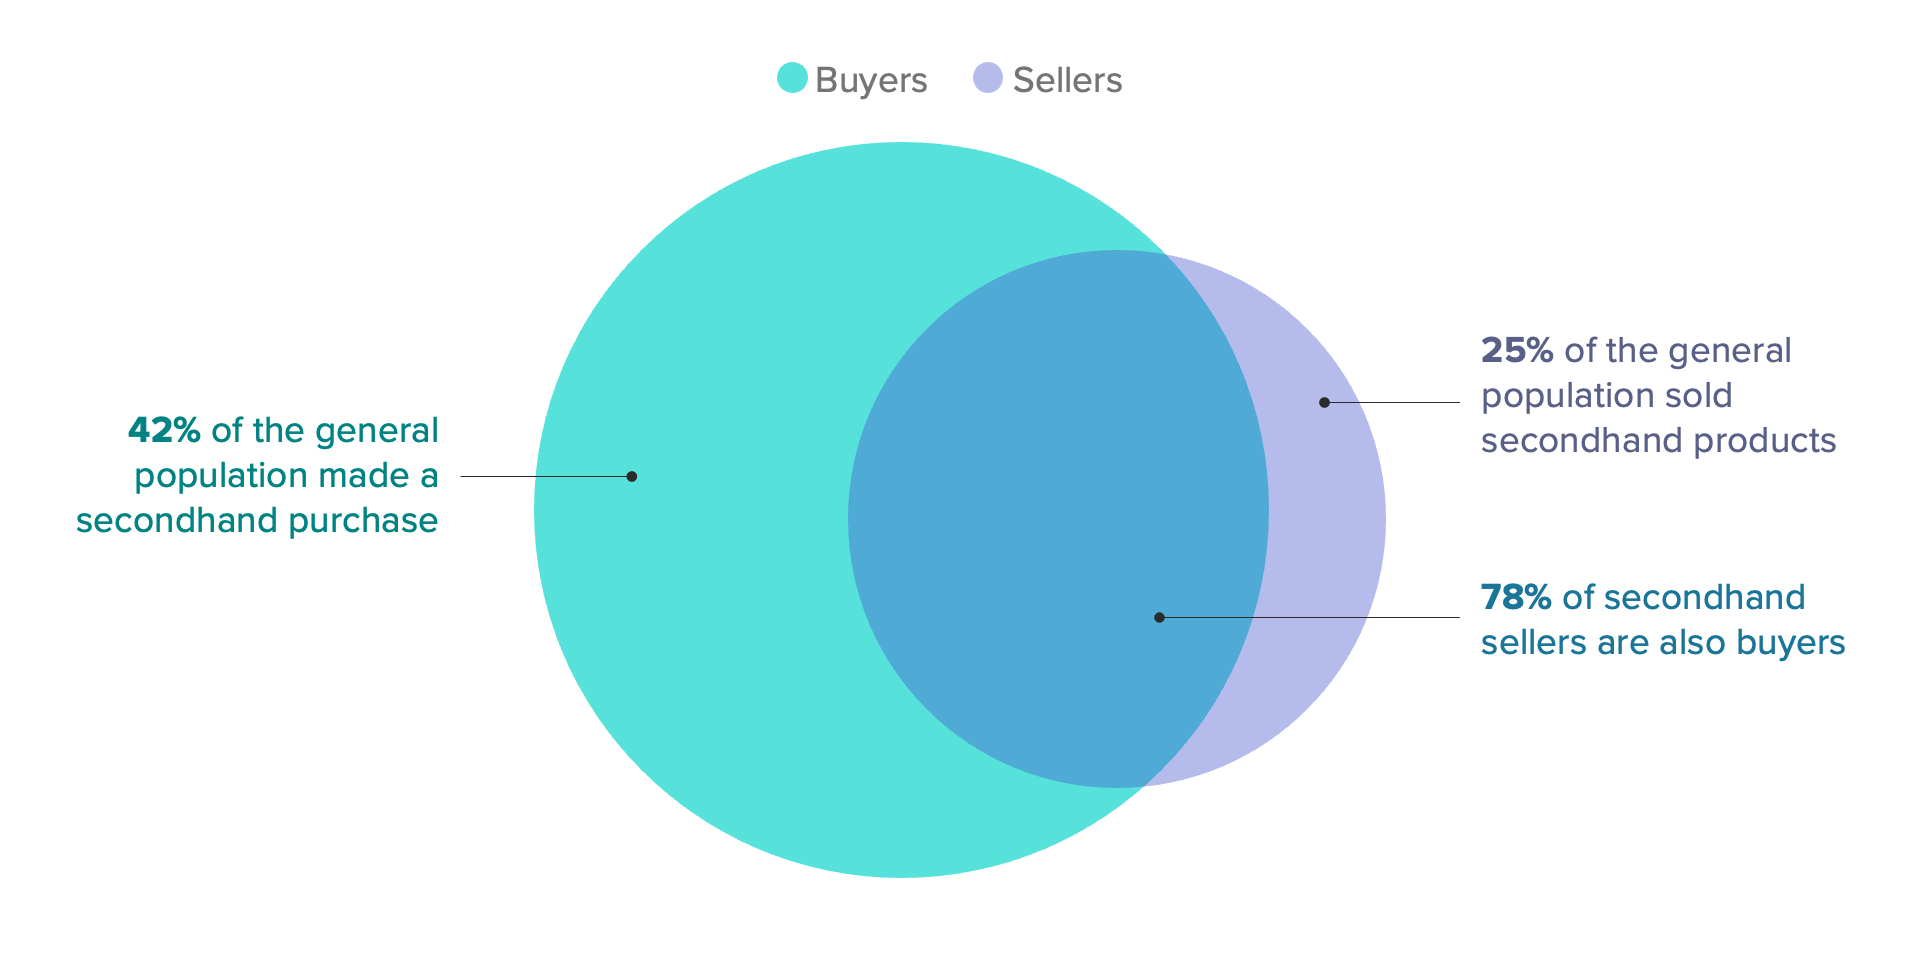 Venn diagram of respondents who bought or sold in the secondhand market within the last three months showing 78% of secondhand sellers are also buyers.